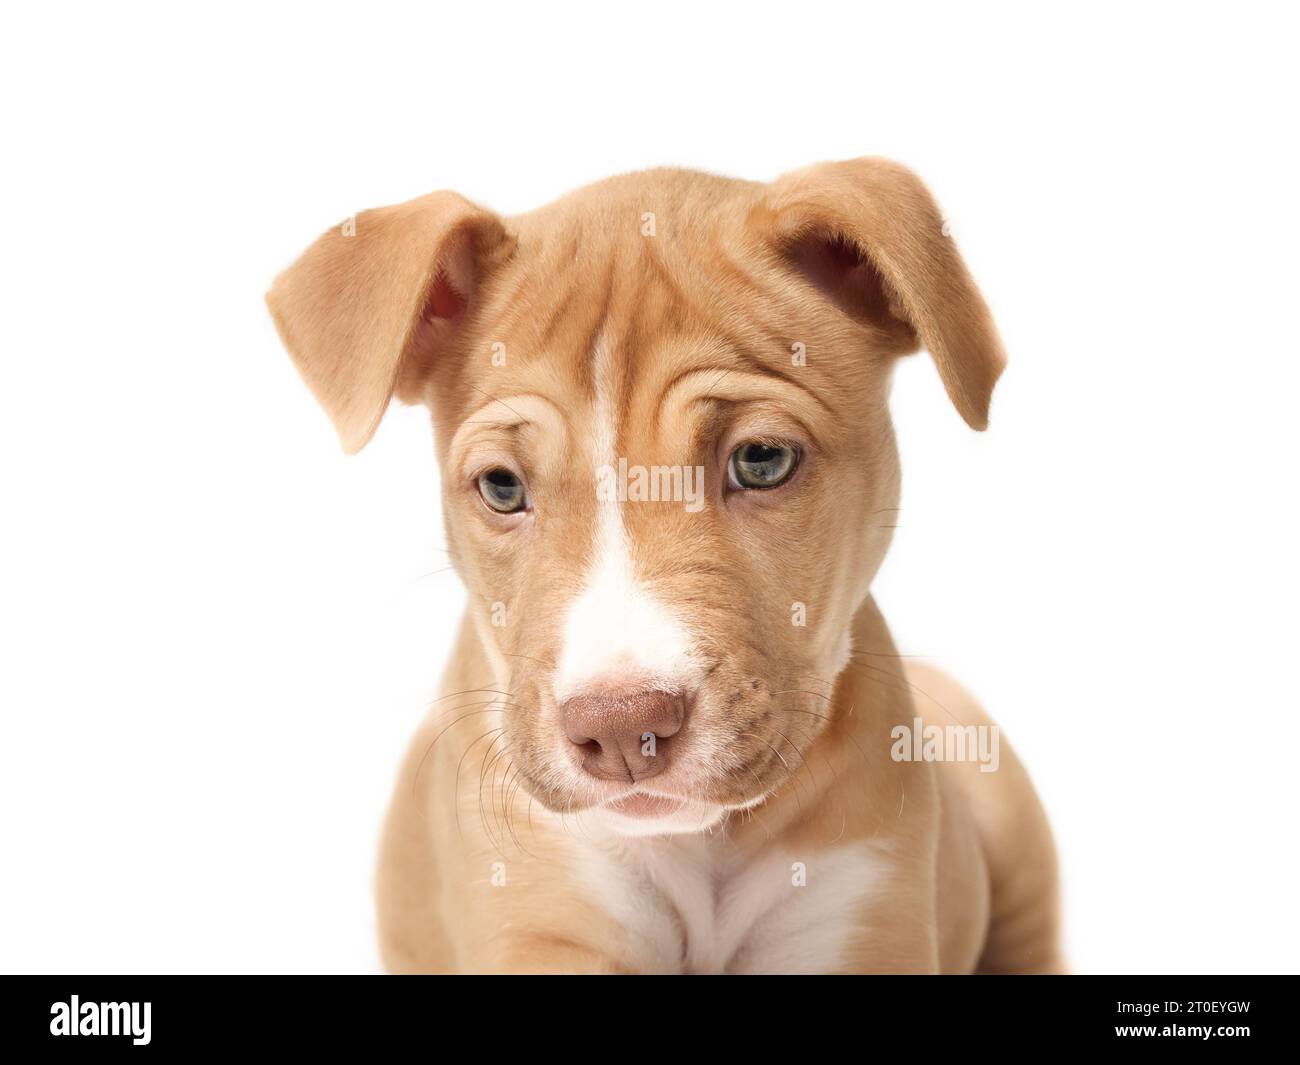 Isolated puppy head shot. Front view cute curios puppy dog looking at something down with tilted head. Beige boxer pitbull mix, 12 weeks old, fawn col Stock Photo